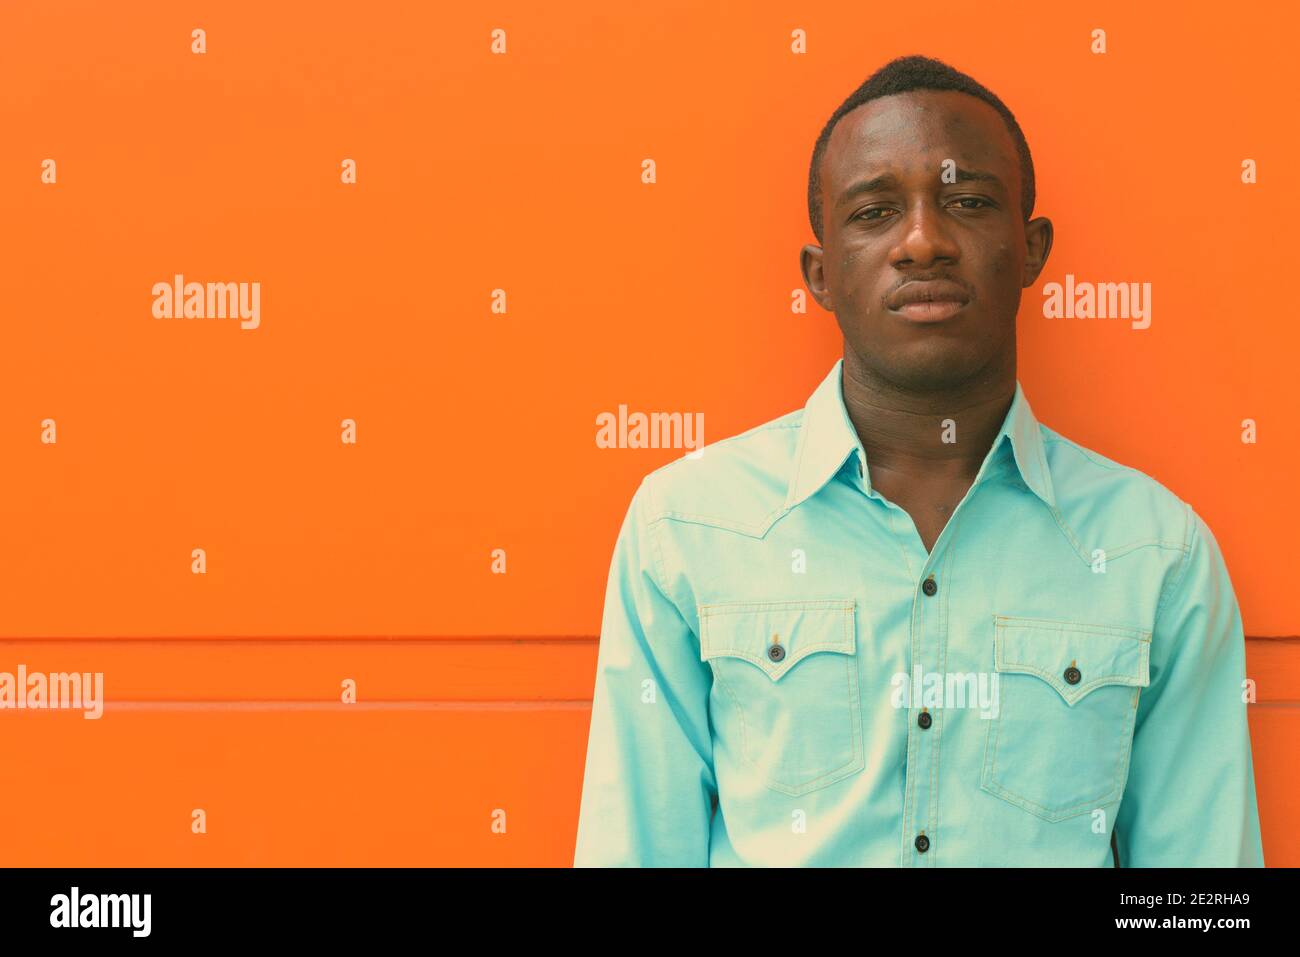 Young black African man leaning against orange painted wall Stock Photo